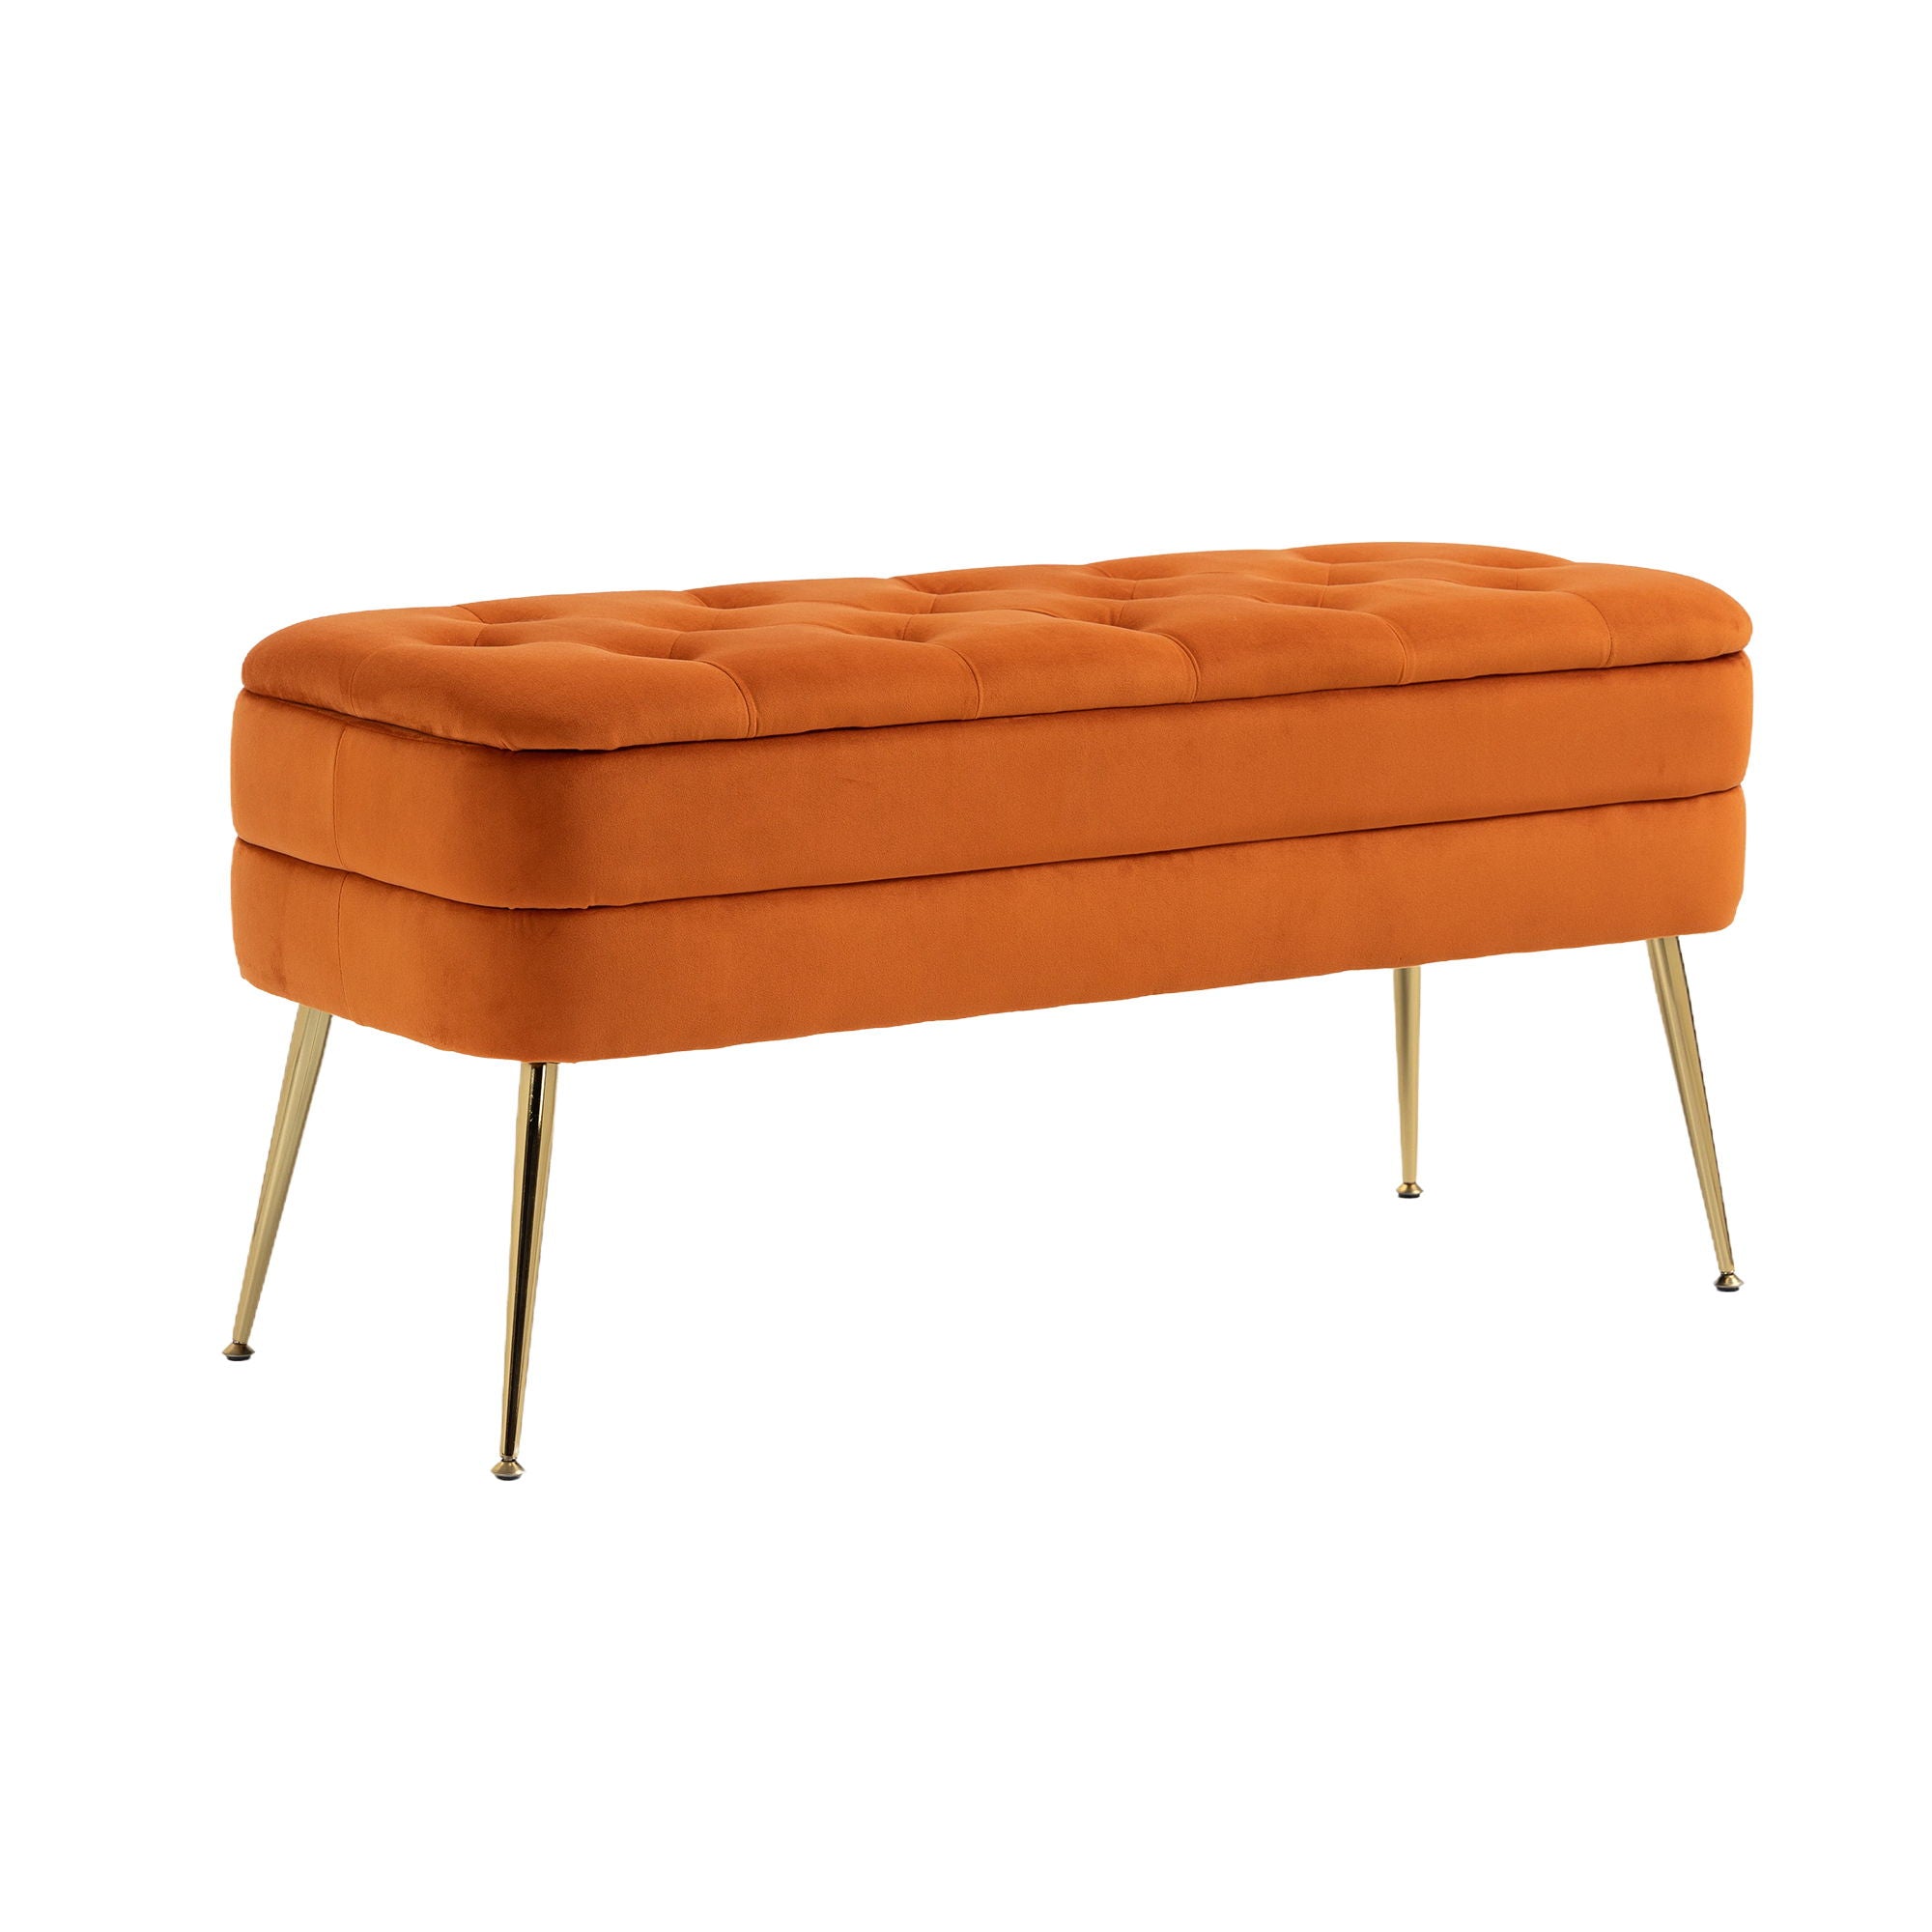 Coolmore Storage Ottoman, Bedroom End Bench, Upholstered Fabric Storage Ottoman With Safety Hinge, Entryway Padded Footstool, Ottoman Bench For Living Room & Bedroom - Orange